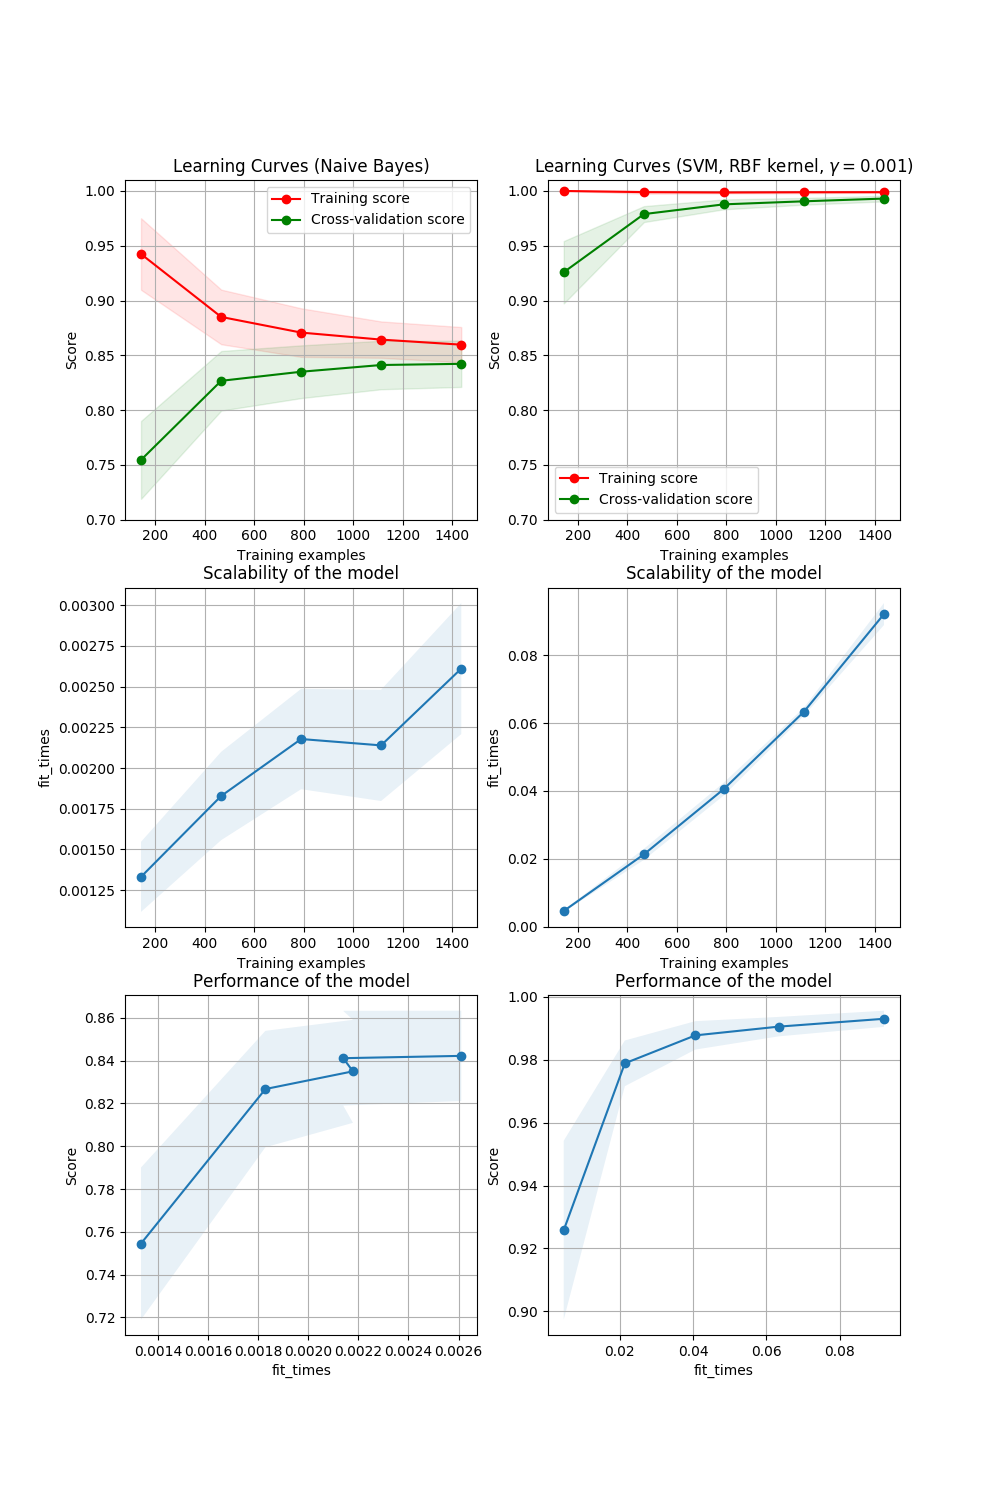 ../_images/sphx_glr_plot_learning_curve_0011.png